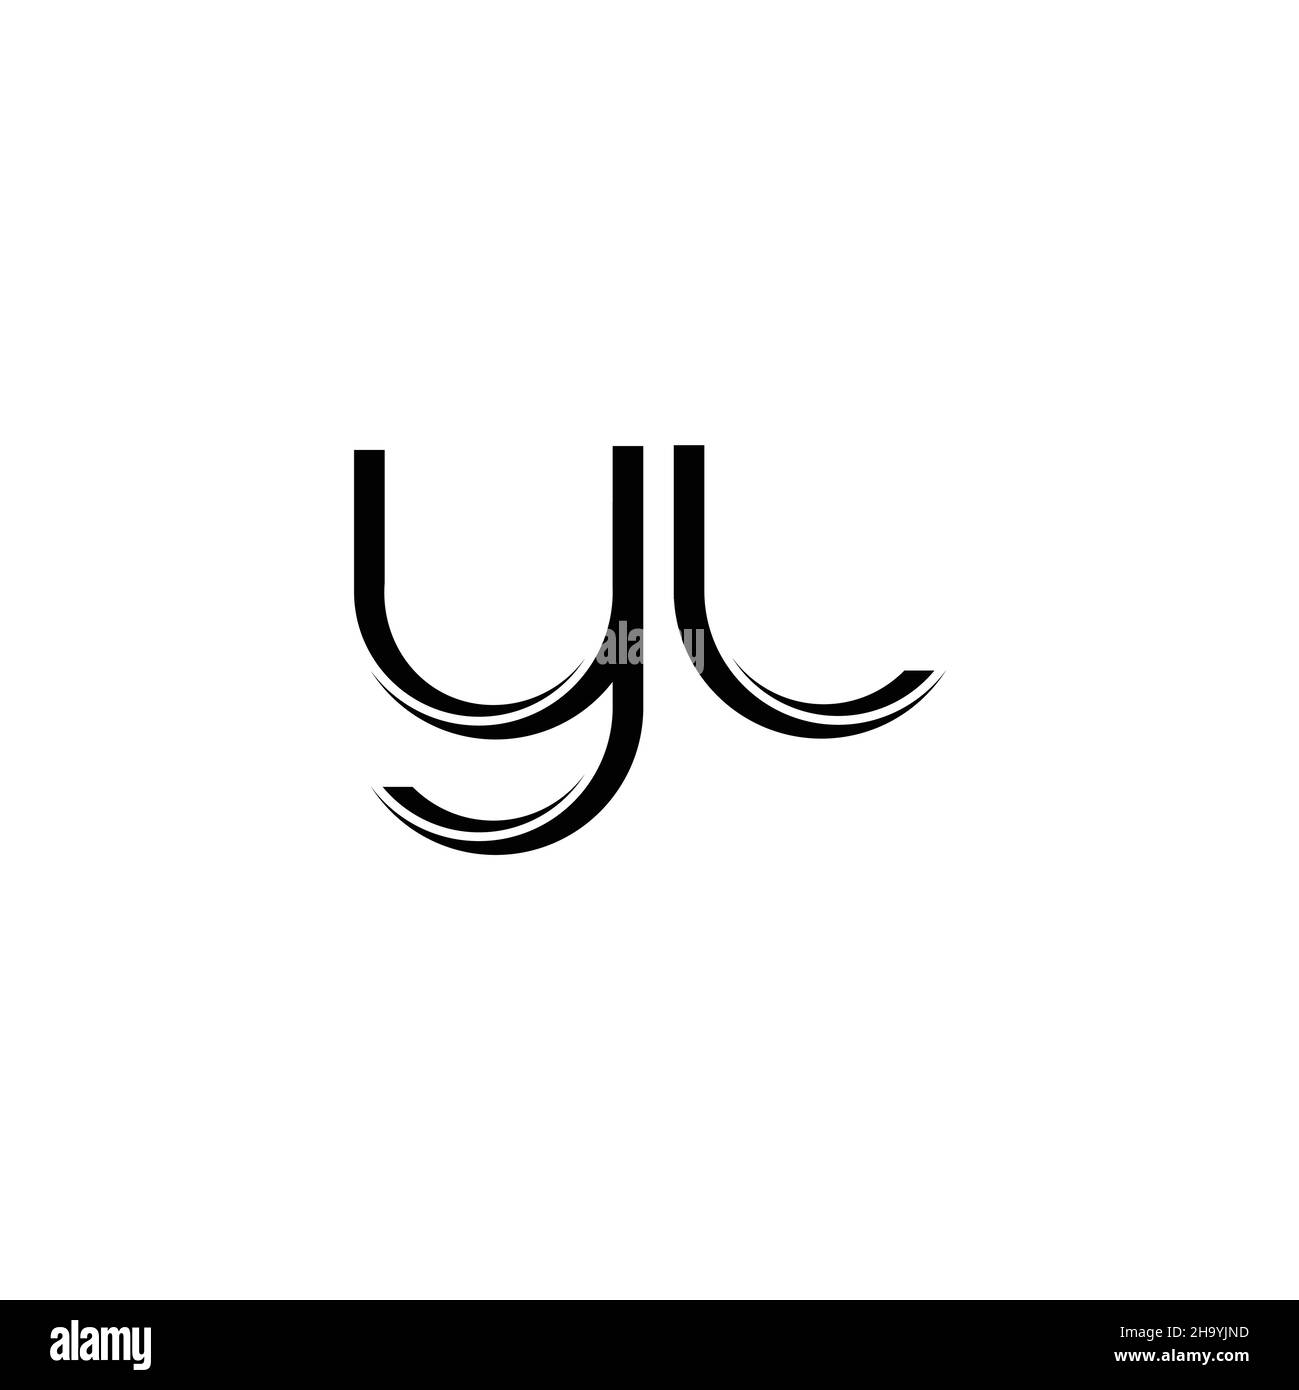 Yl letters Black and White Stock Photos & Images - Page 2 - Alamy